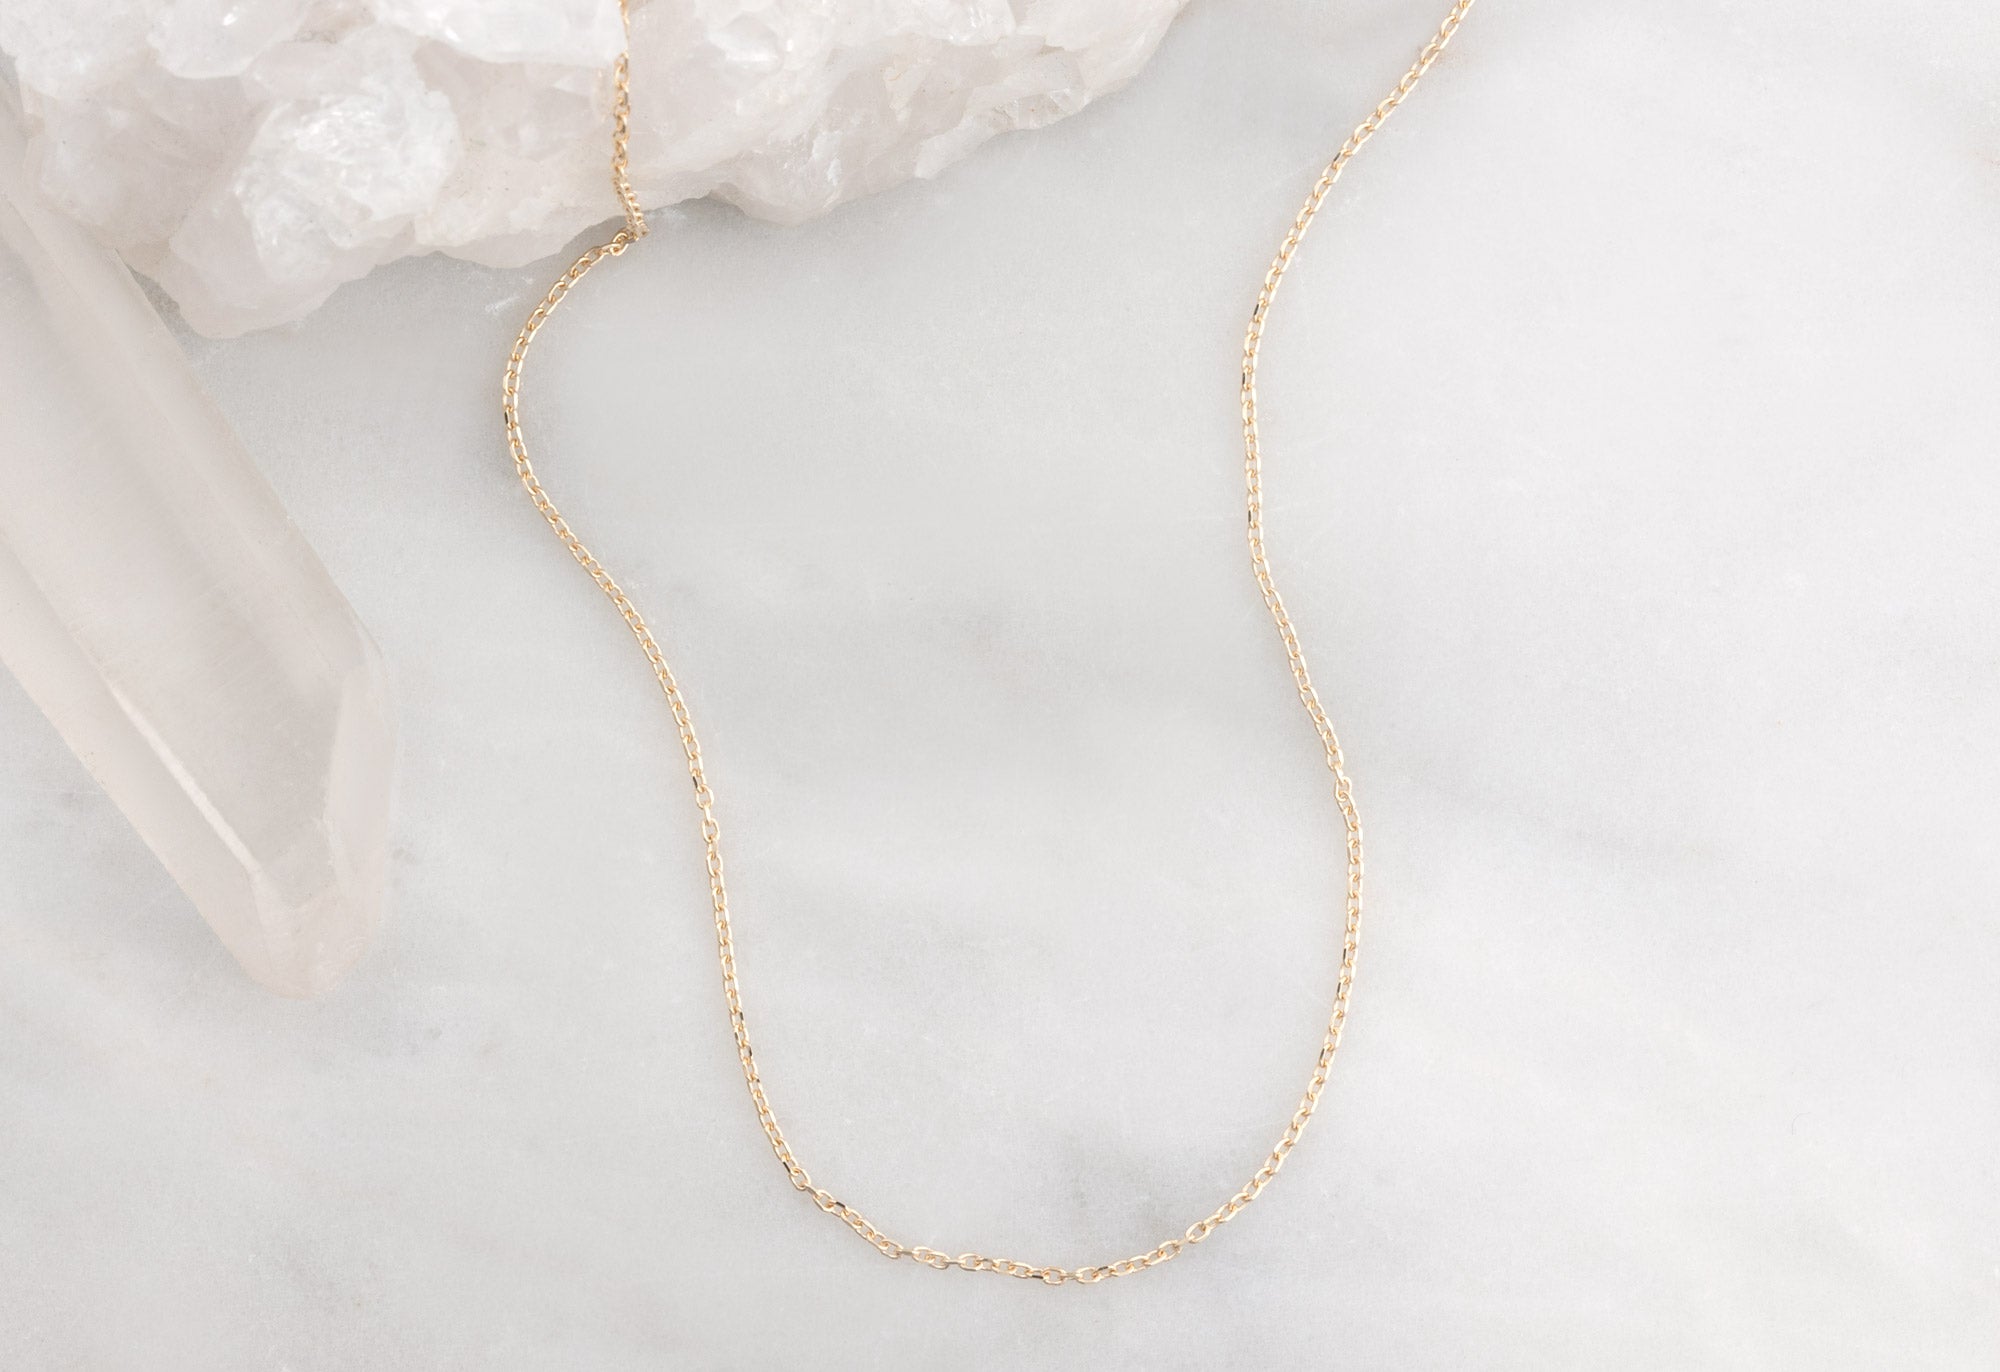 Yellow Gold Diamond-Cut Cable Chain Charm Necklace on White Marble Tile